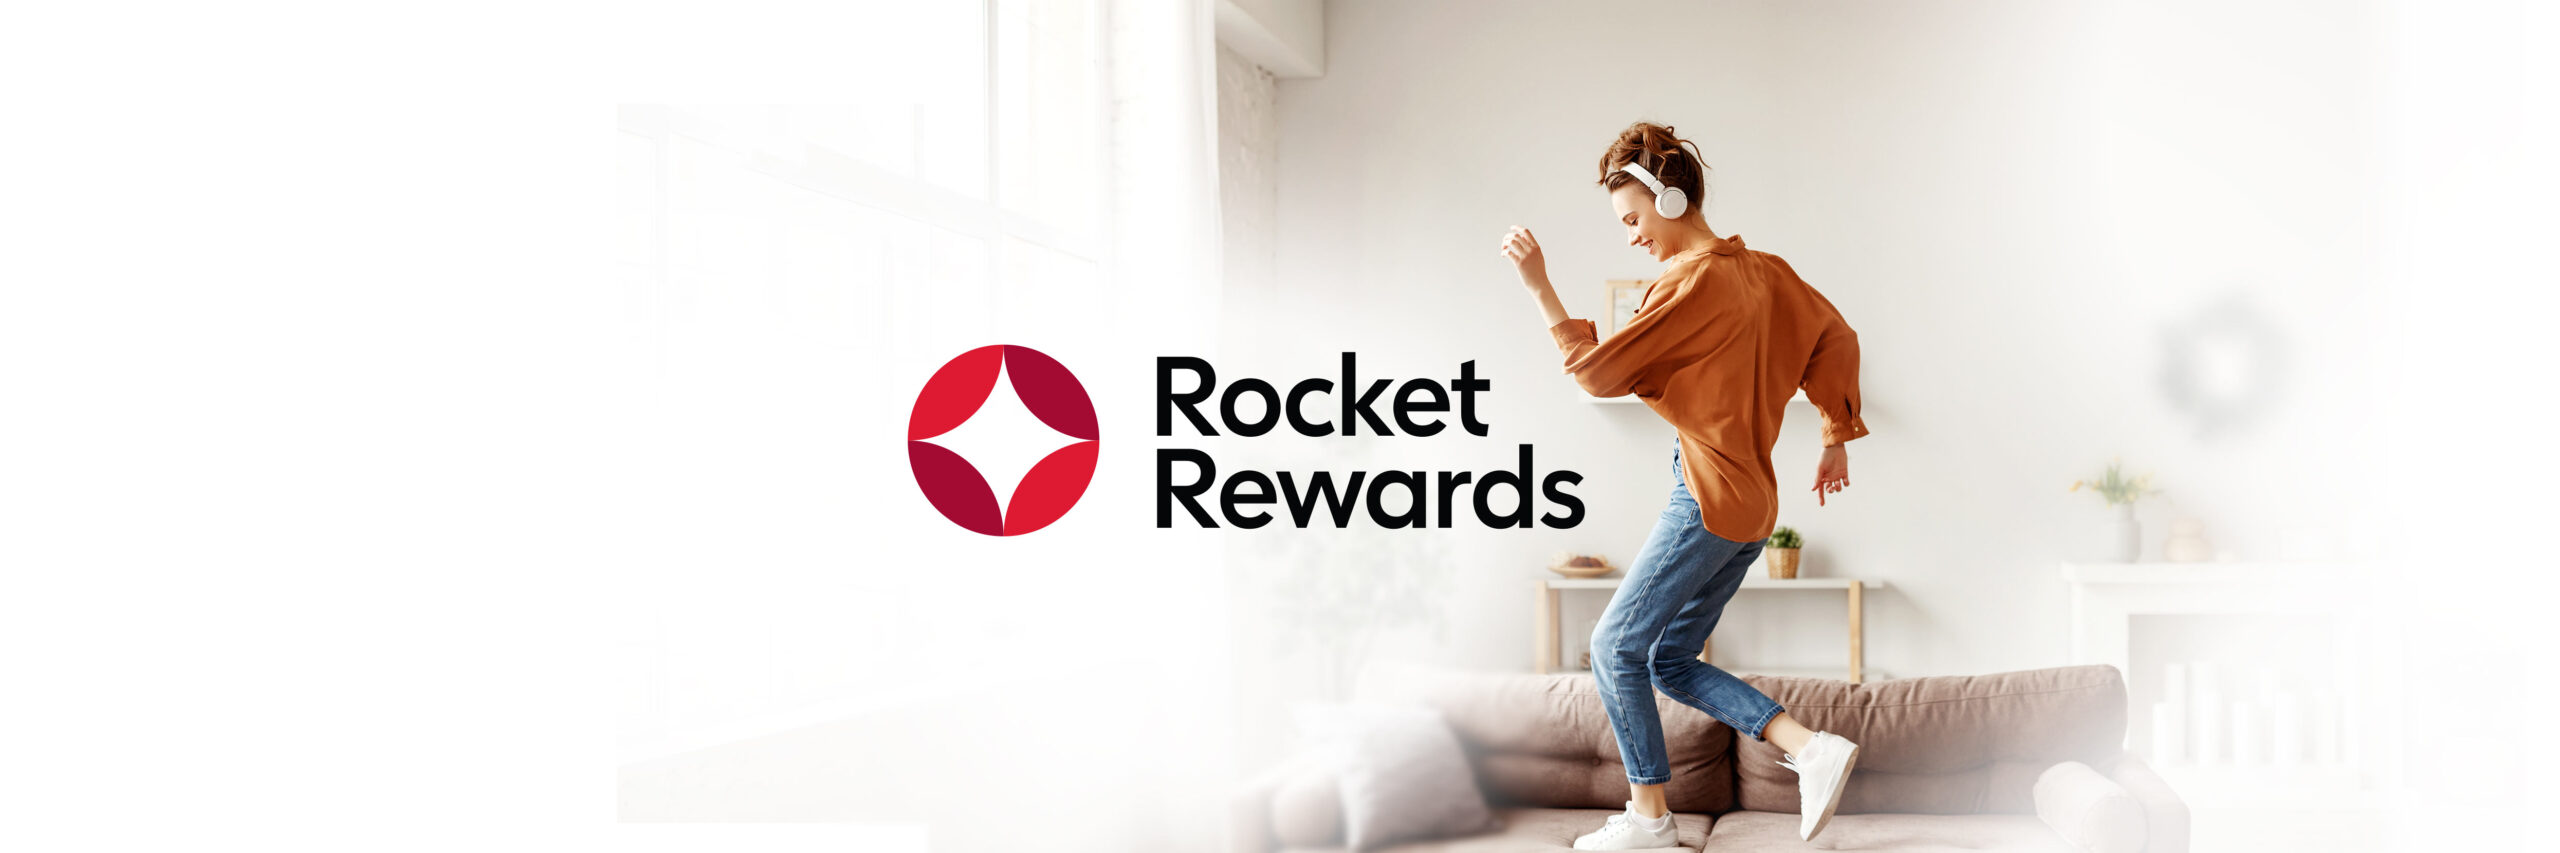 Rocket Companies Introduces Rocket Rewards: New Engagement Program Helps Consumers Save Toward Their Financial Future